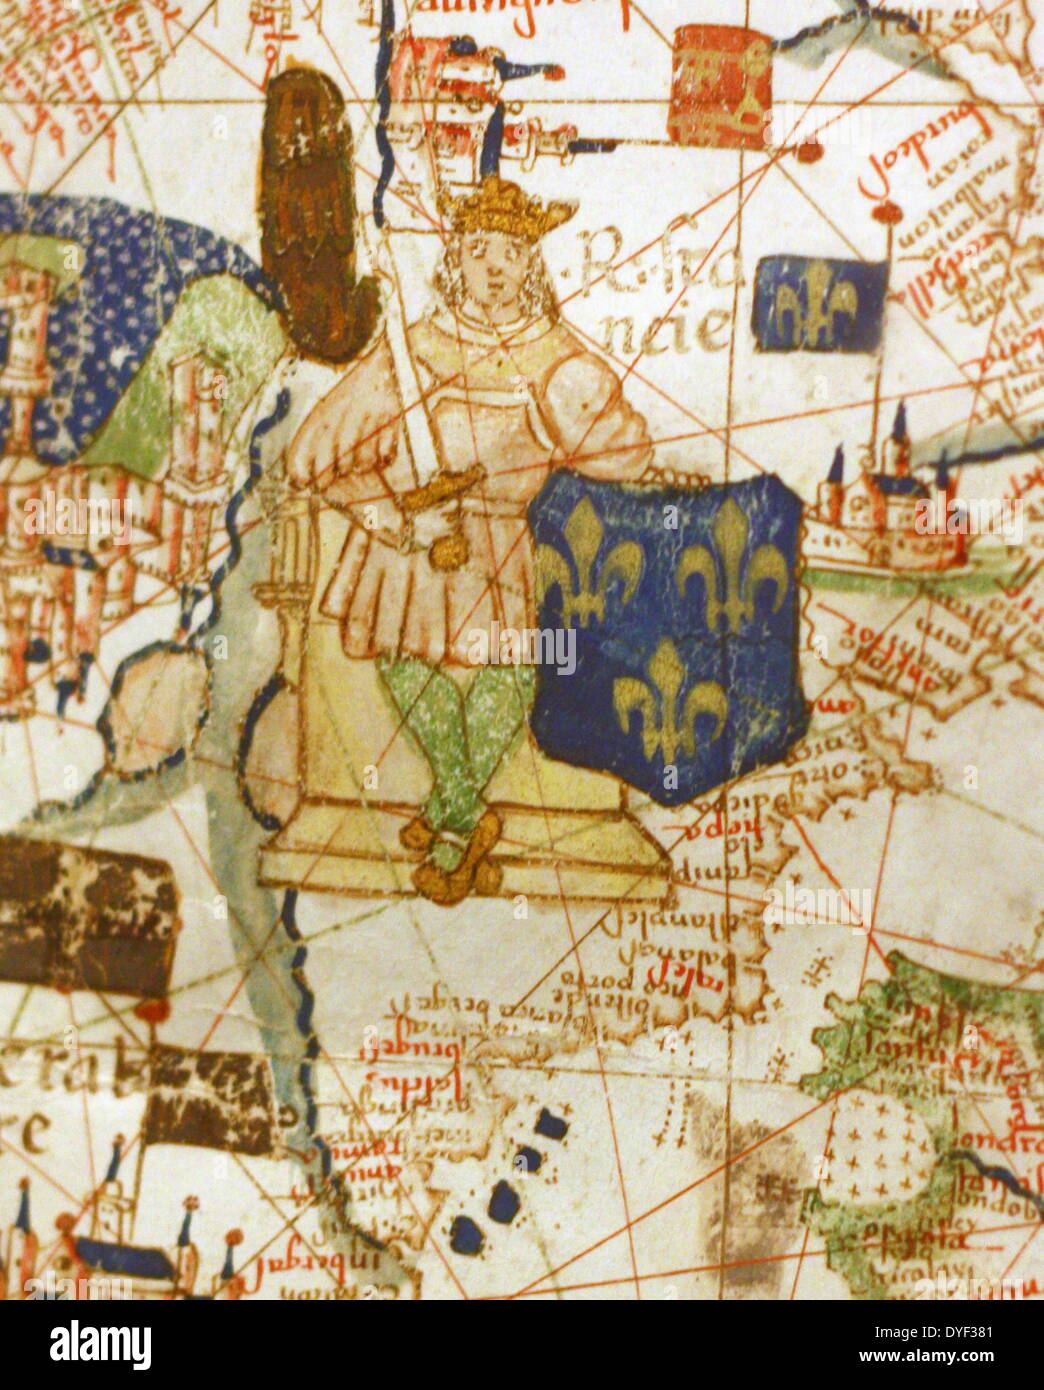 Detail from an illustrated navigational map of Europe, from 1528. Made by Jacopo Russo. In Messina, Sicily. Stock Photo